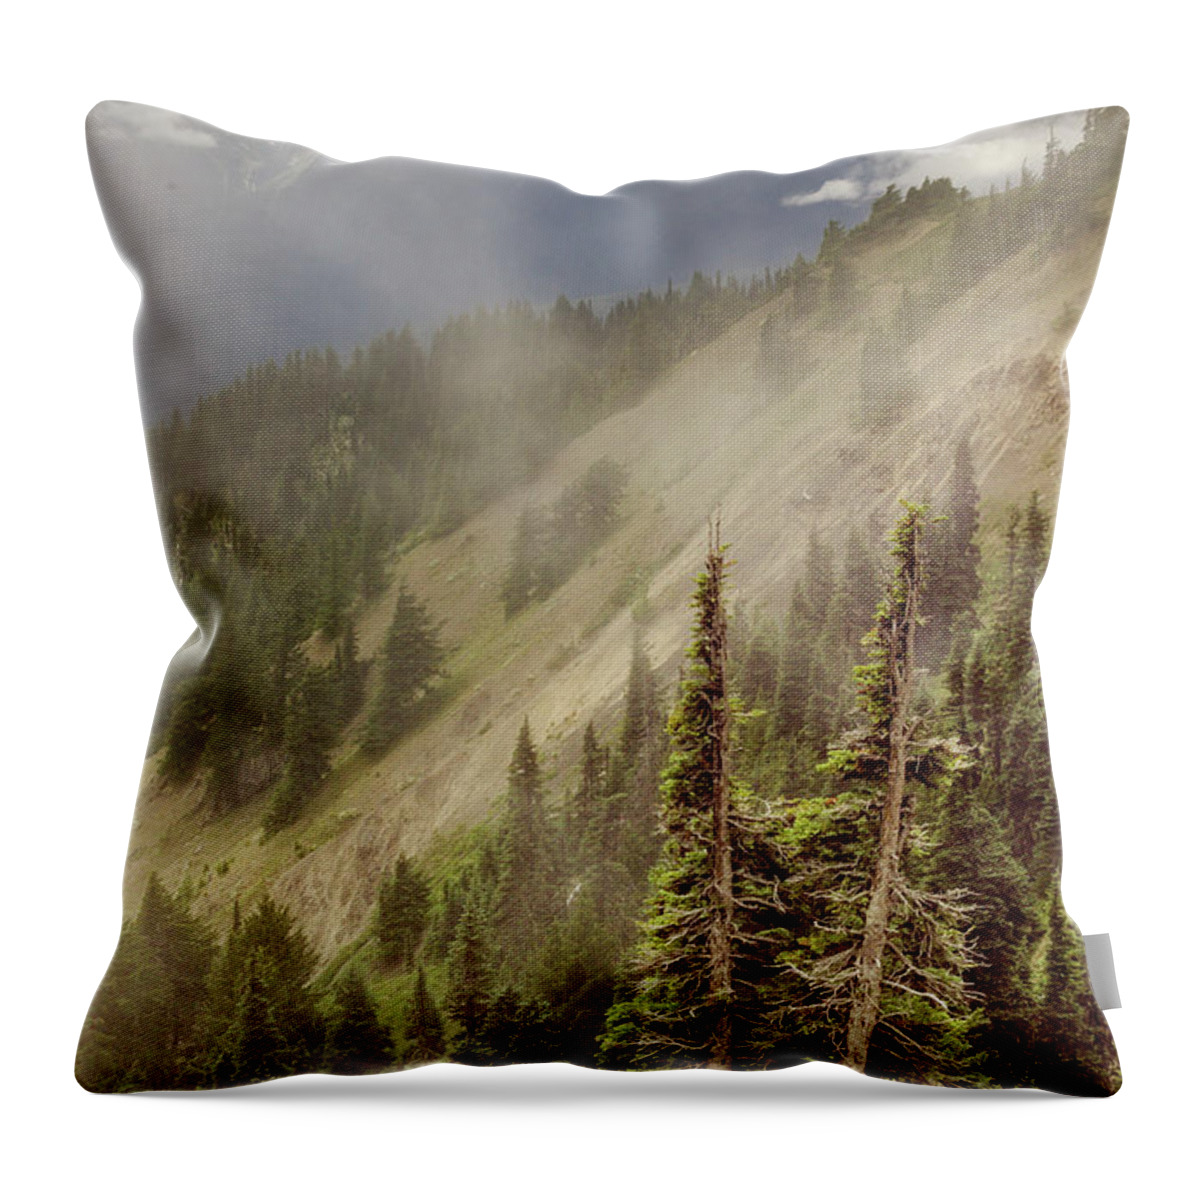 Mountains Throw Pillow featuring the photograph Olympic Range from Hurricane Ridge by Peter J Sucy